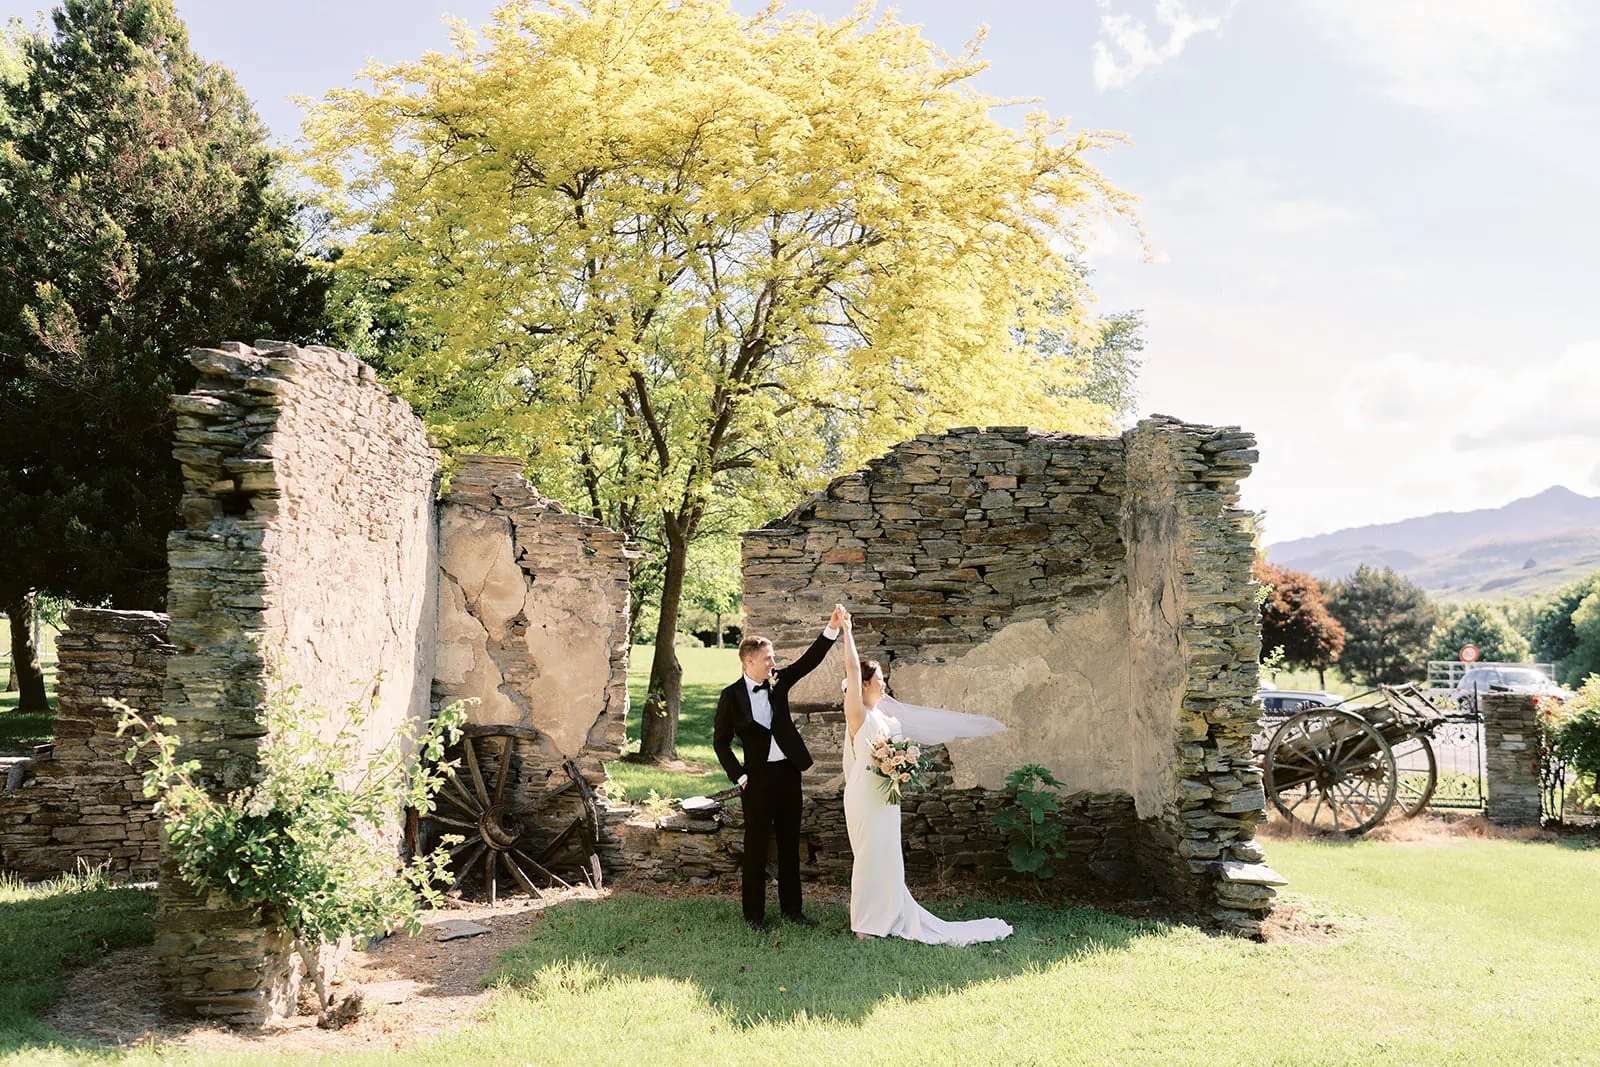 Queenstown Elopement Heli Wedding Photographer クイーンズタウン結婚式 | Shane and MJ, the bride and groom, strike a pose in front of the majestic Stoneridge Queenstown ruins.